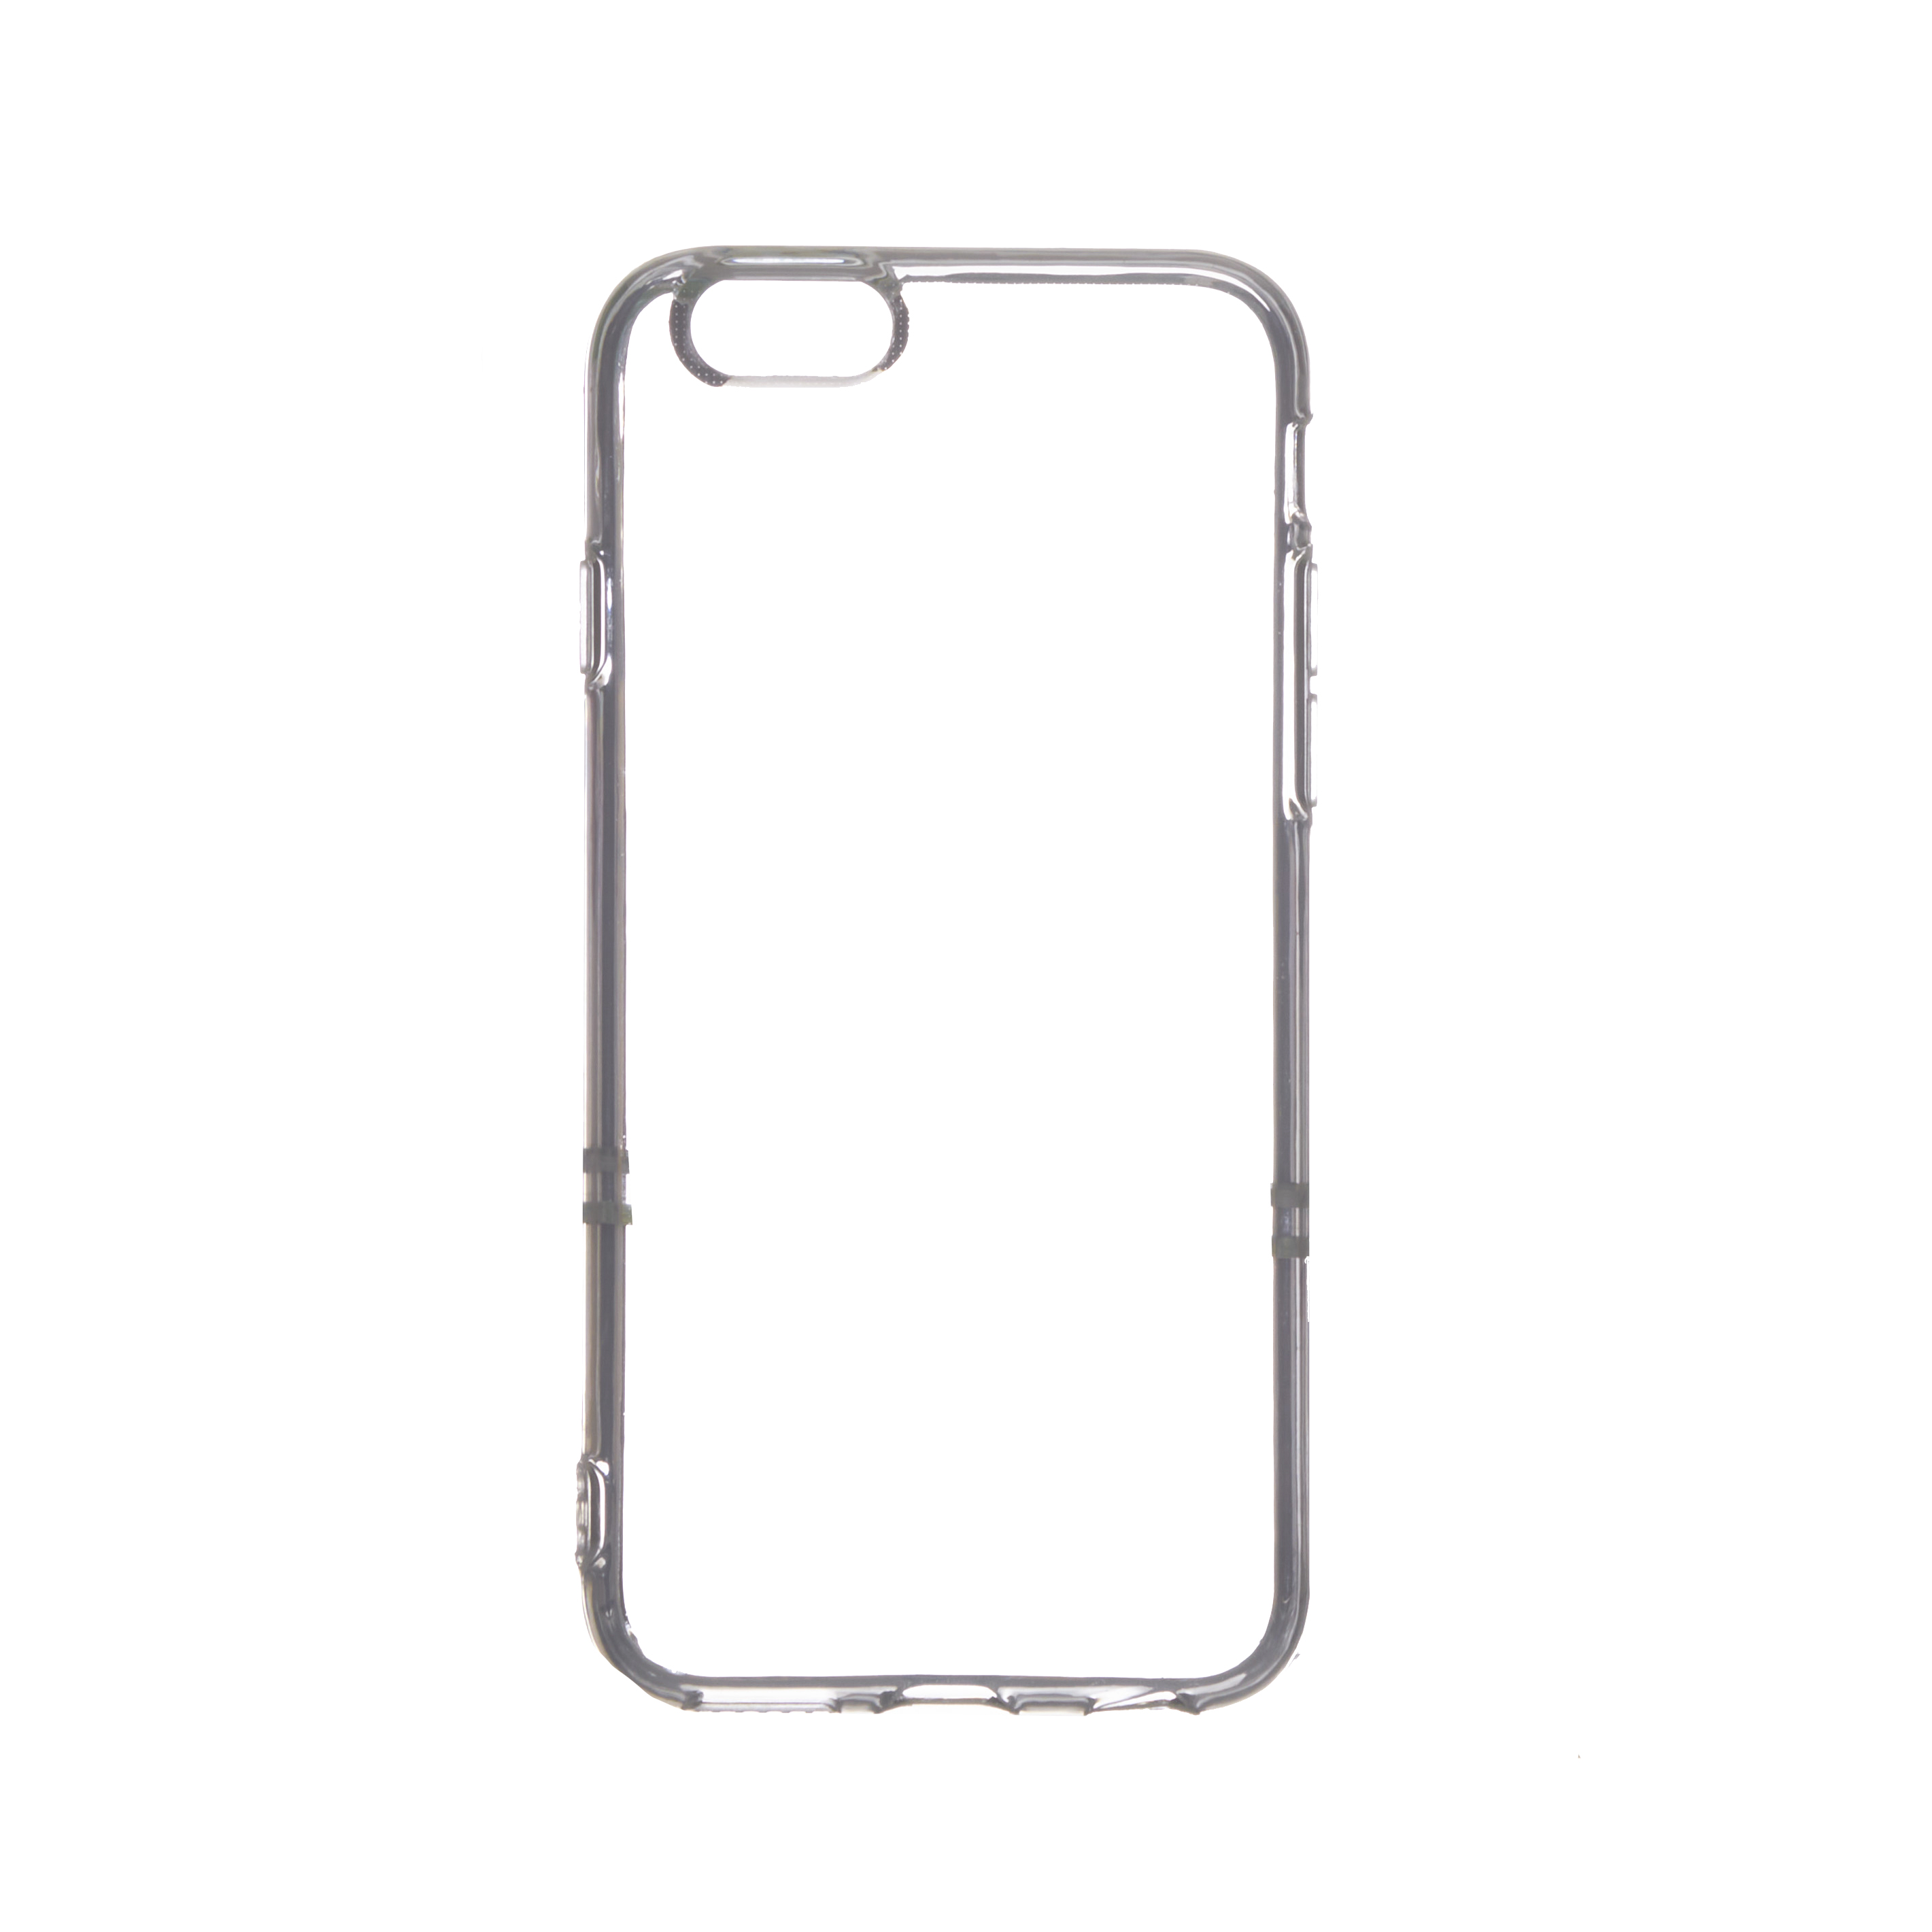 Tpu clear solid for iphone 6/6s (4.7")